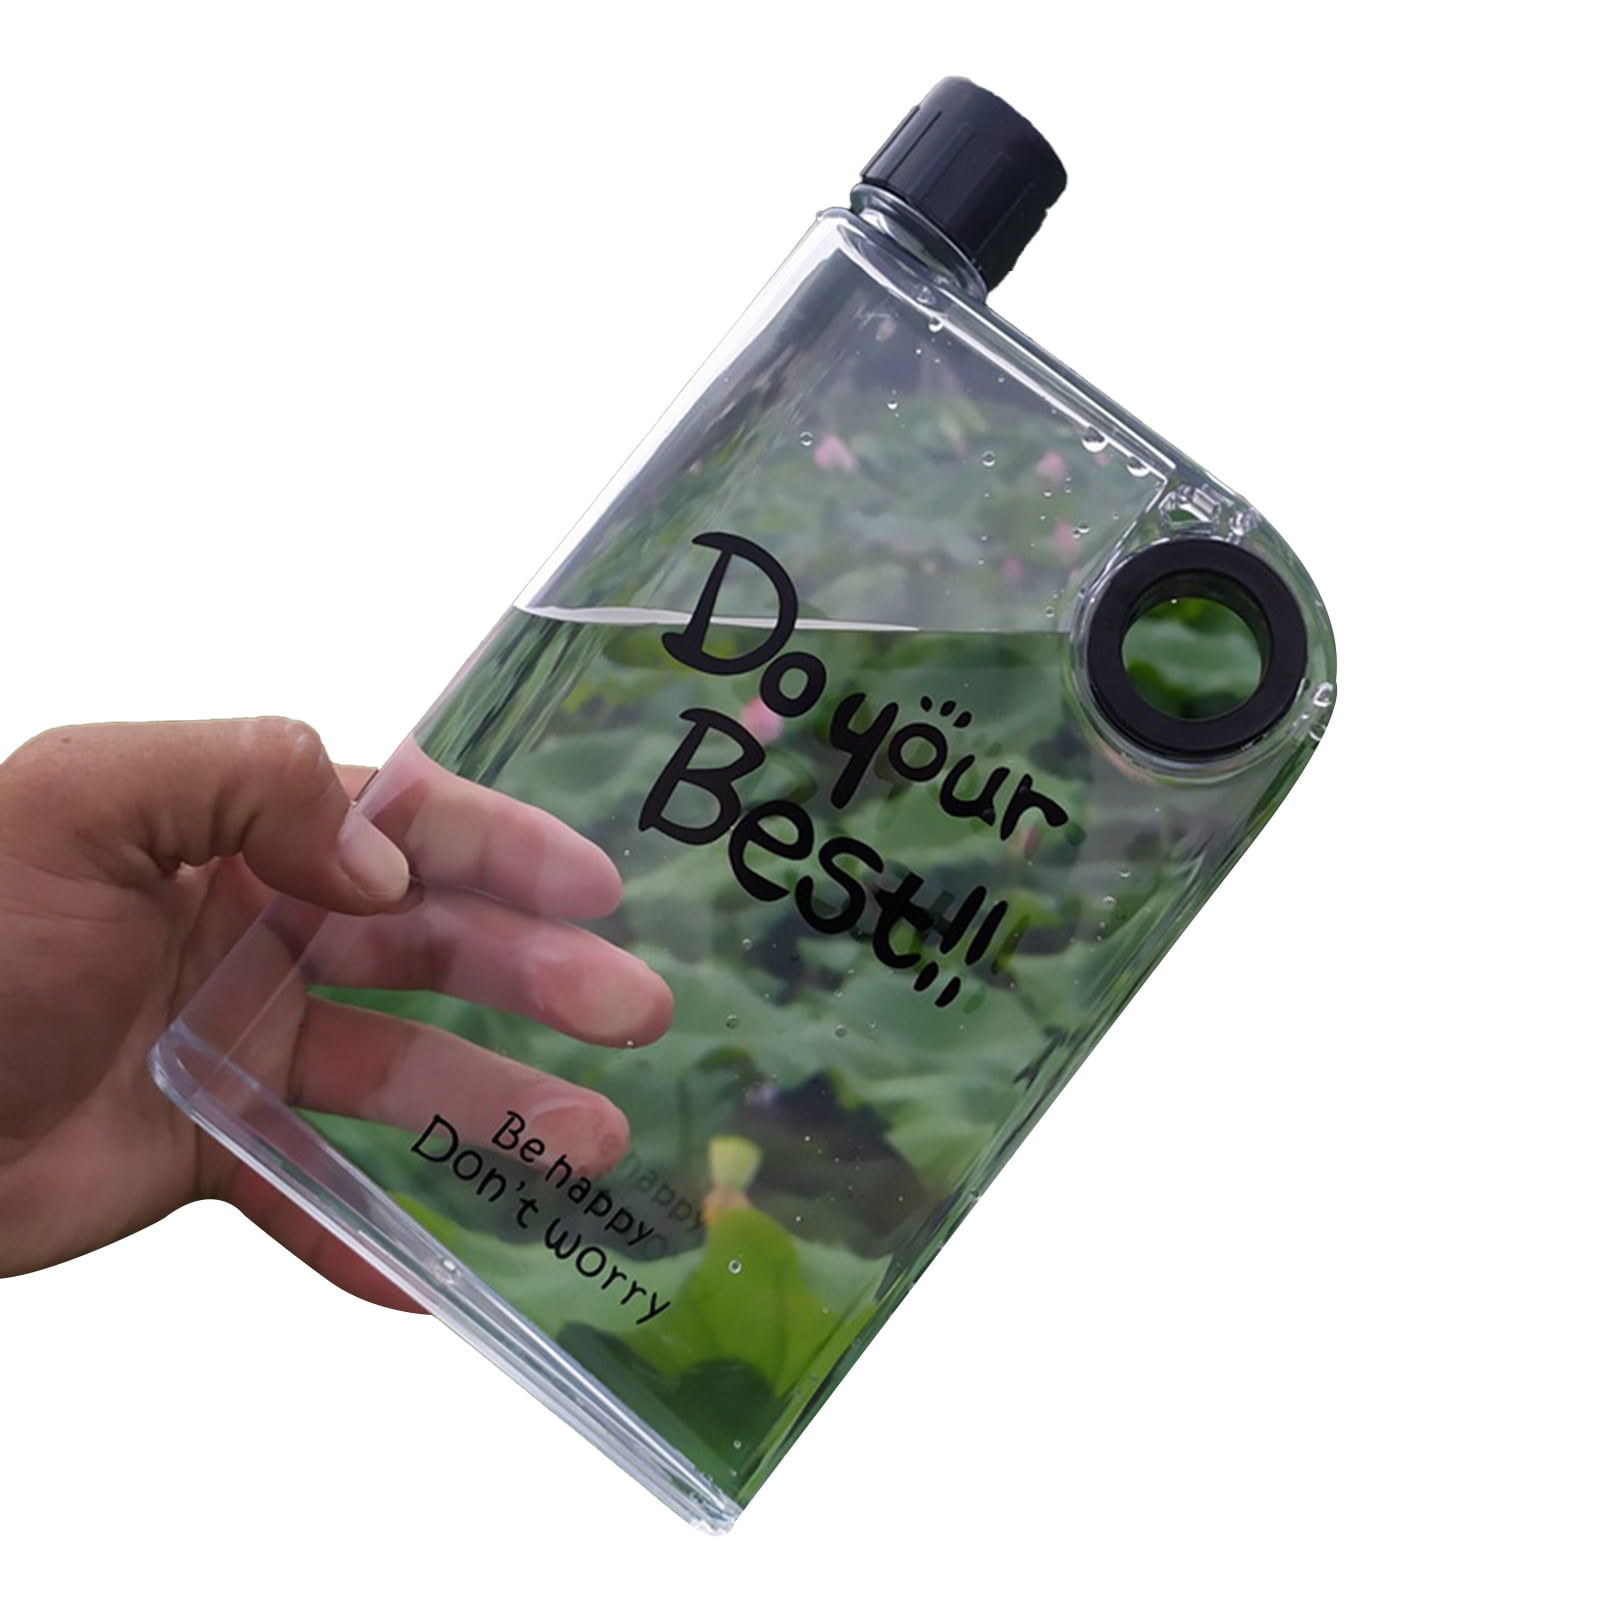  MosBug Clear Reusable Slim Flat Water Bottle 420ML abs Portable  - Fits in Pocket &Random Corner.for School,Sports, Travel, Dining Time :  Sports & Outdoors